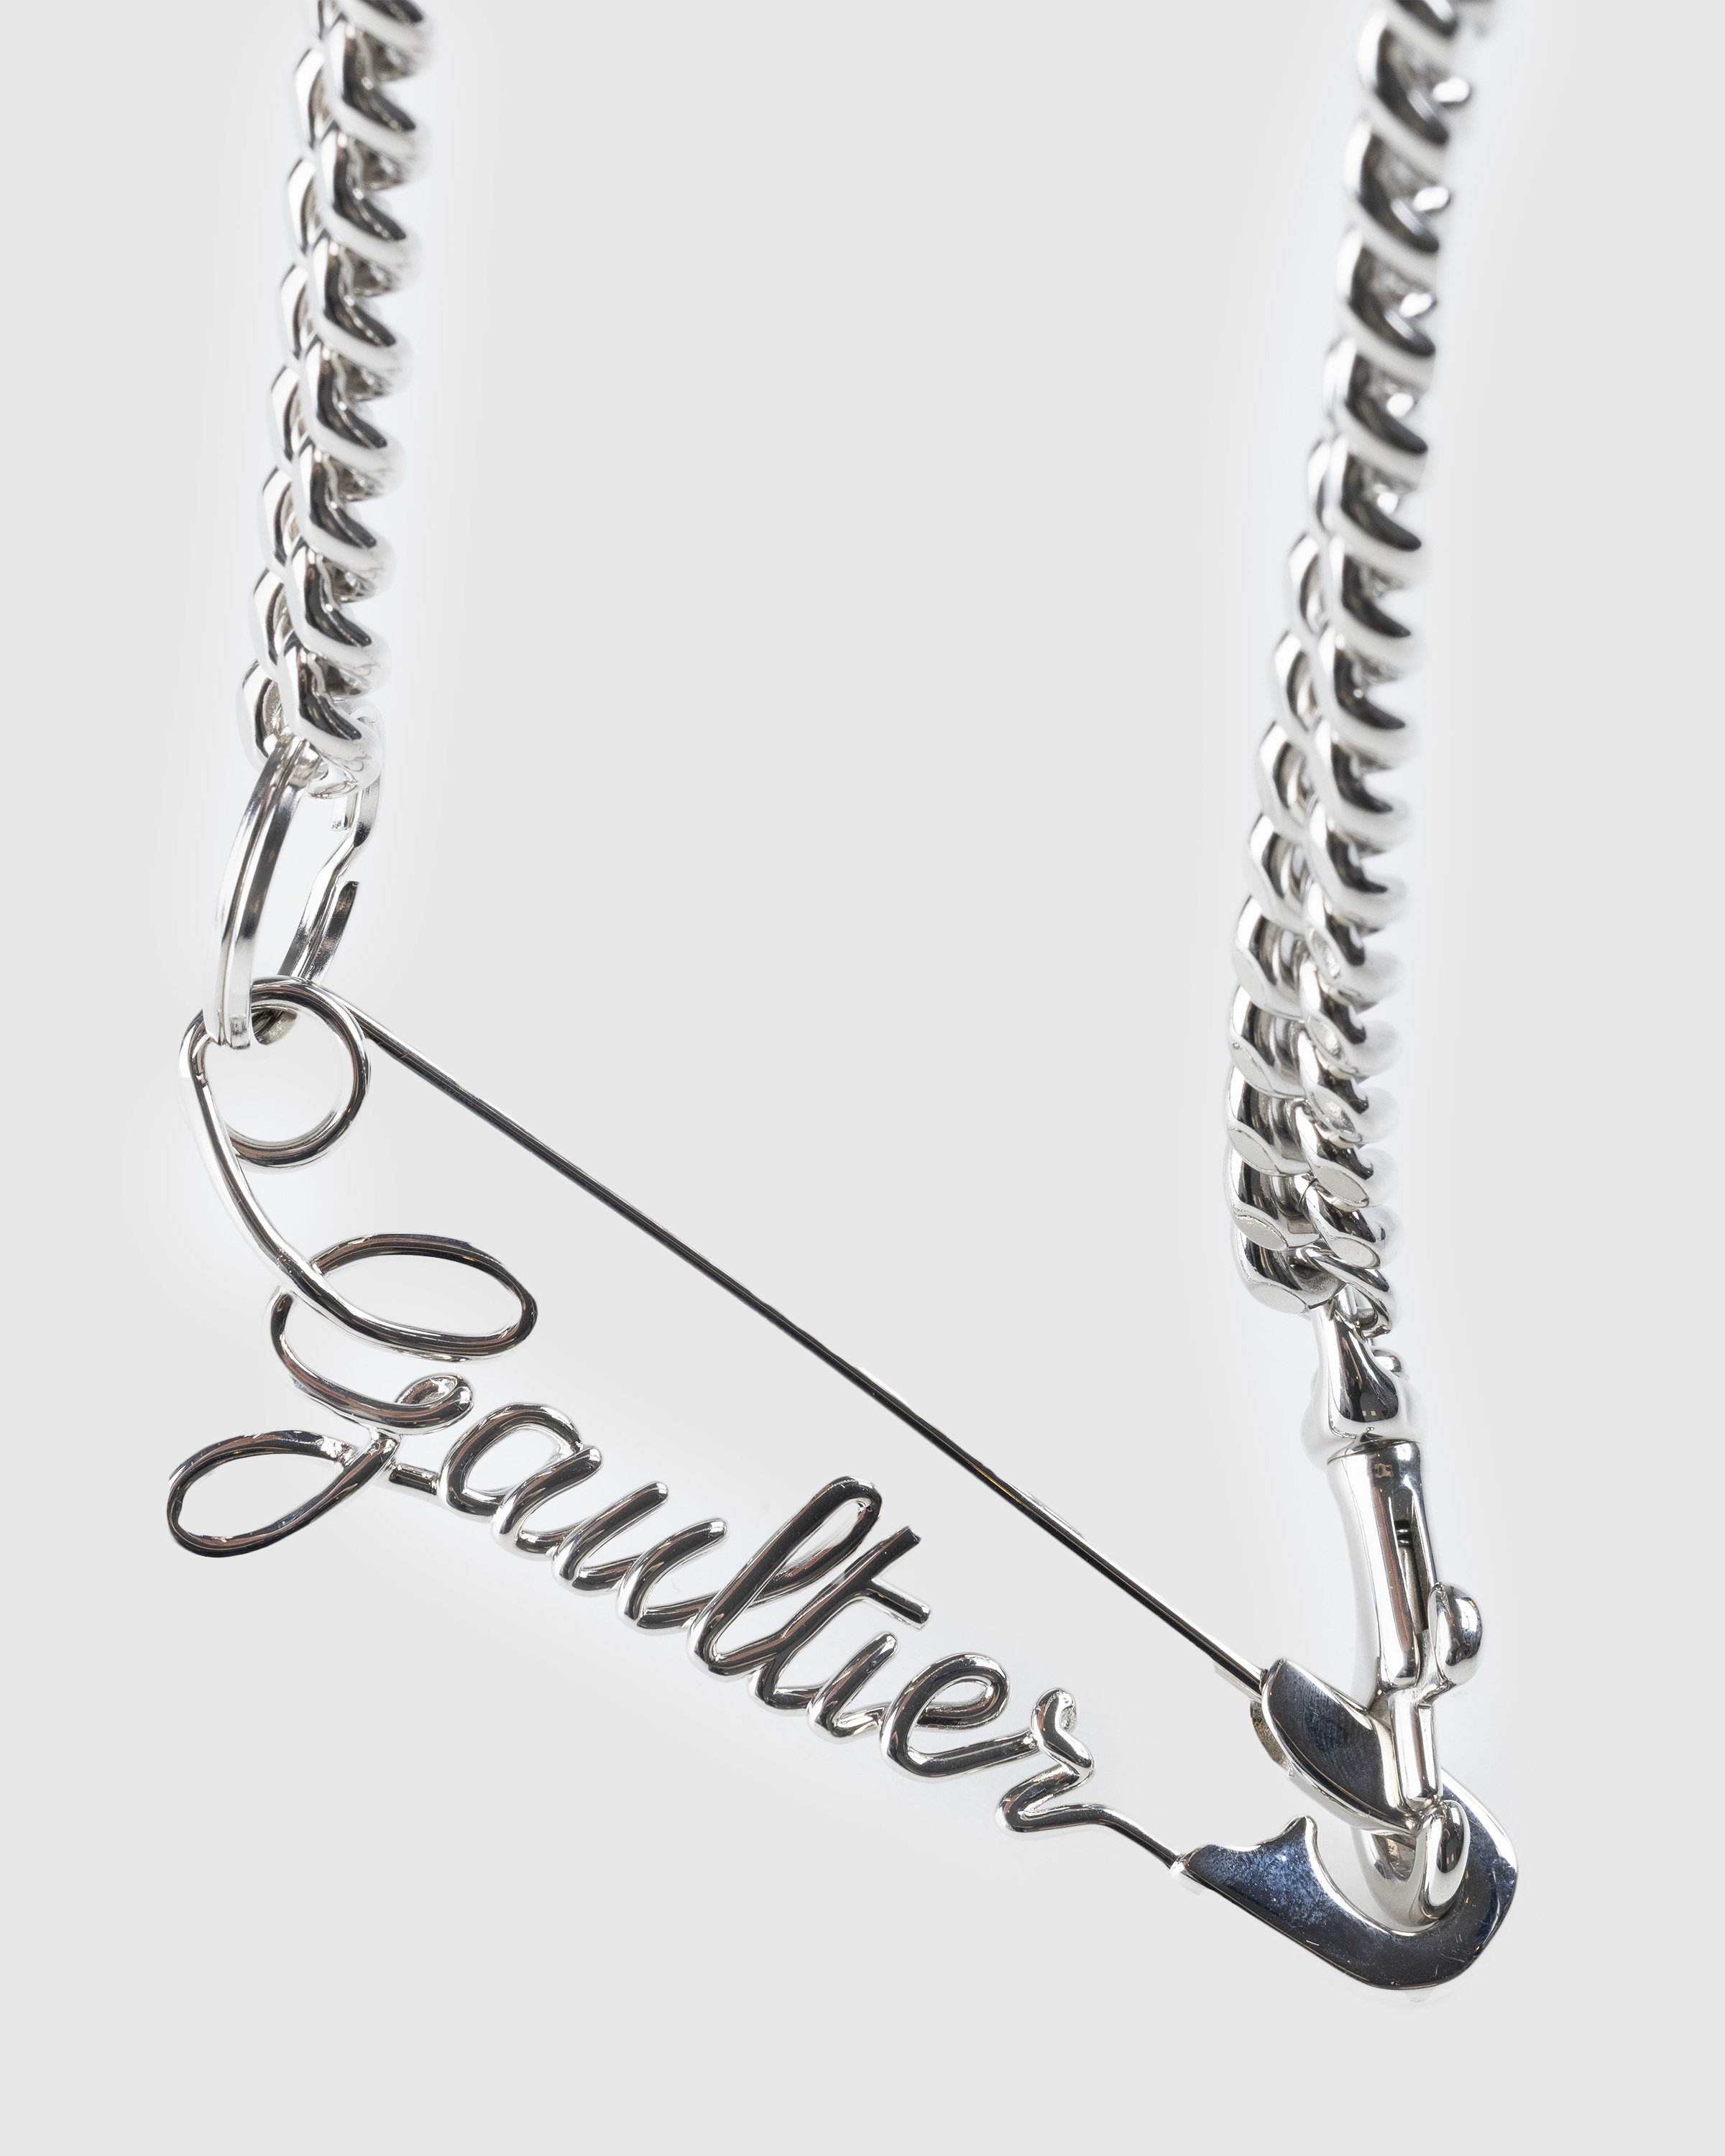 Jean Paul Gaultier - Safety Pin Gaultier Necklace Silver - Accessories - Silver - Image 2